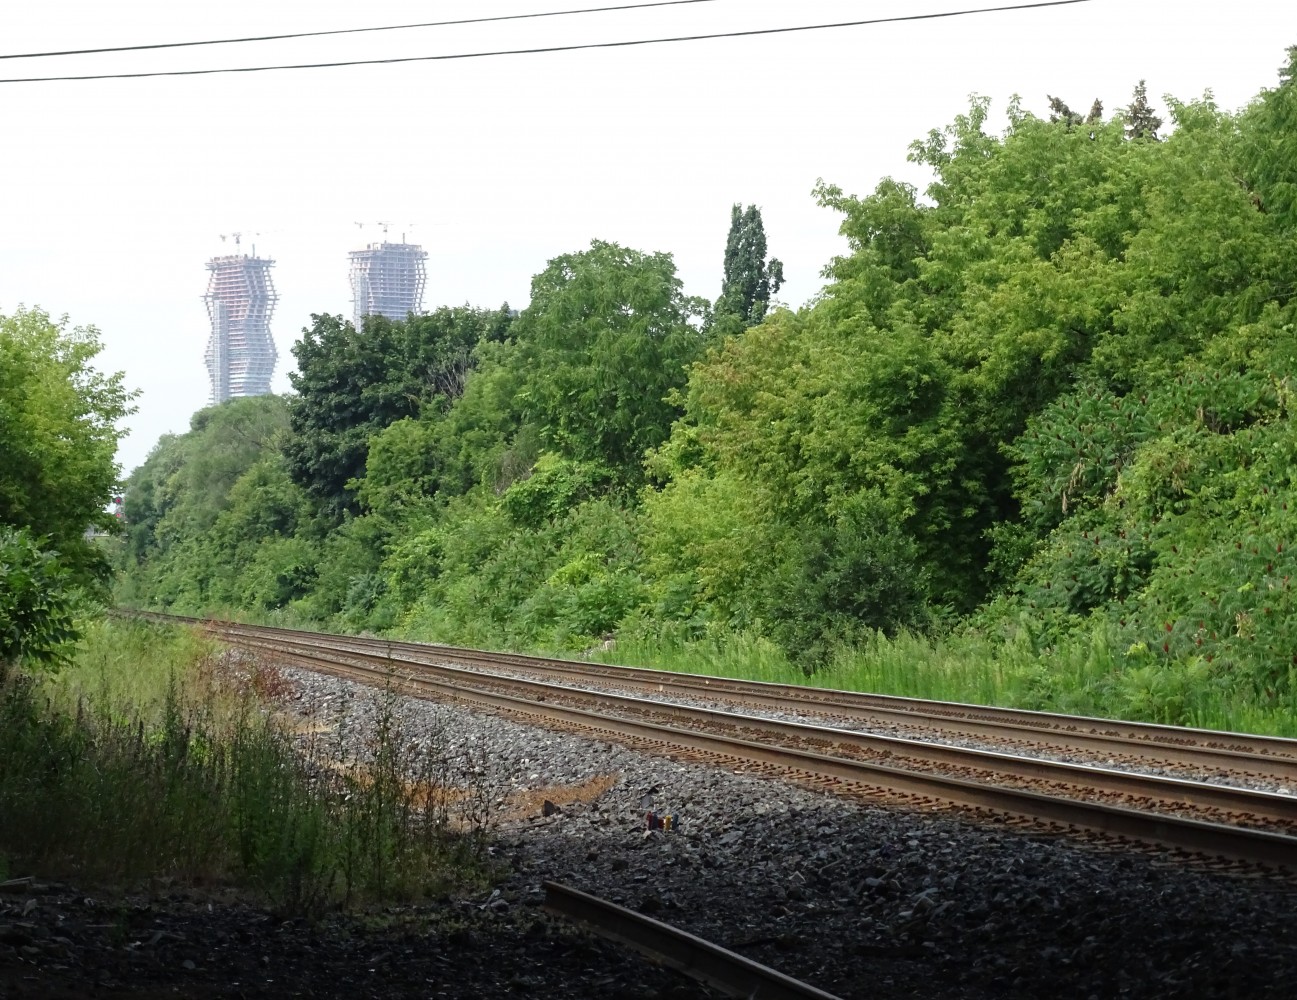 Tragic death of 4-year-old on GO tracks raises questions about railway safety in Mississauga 